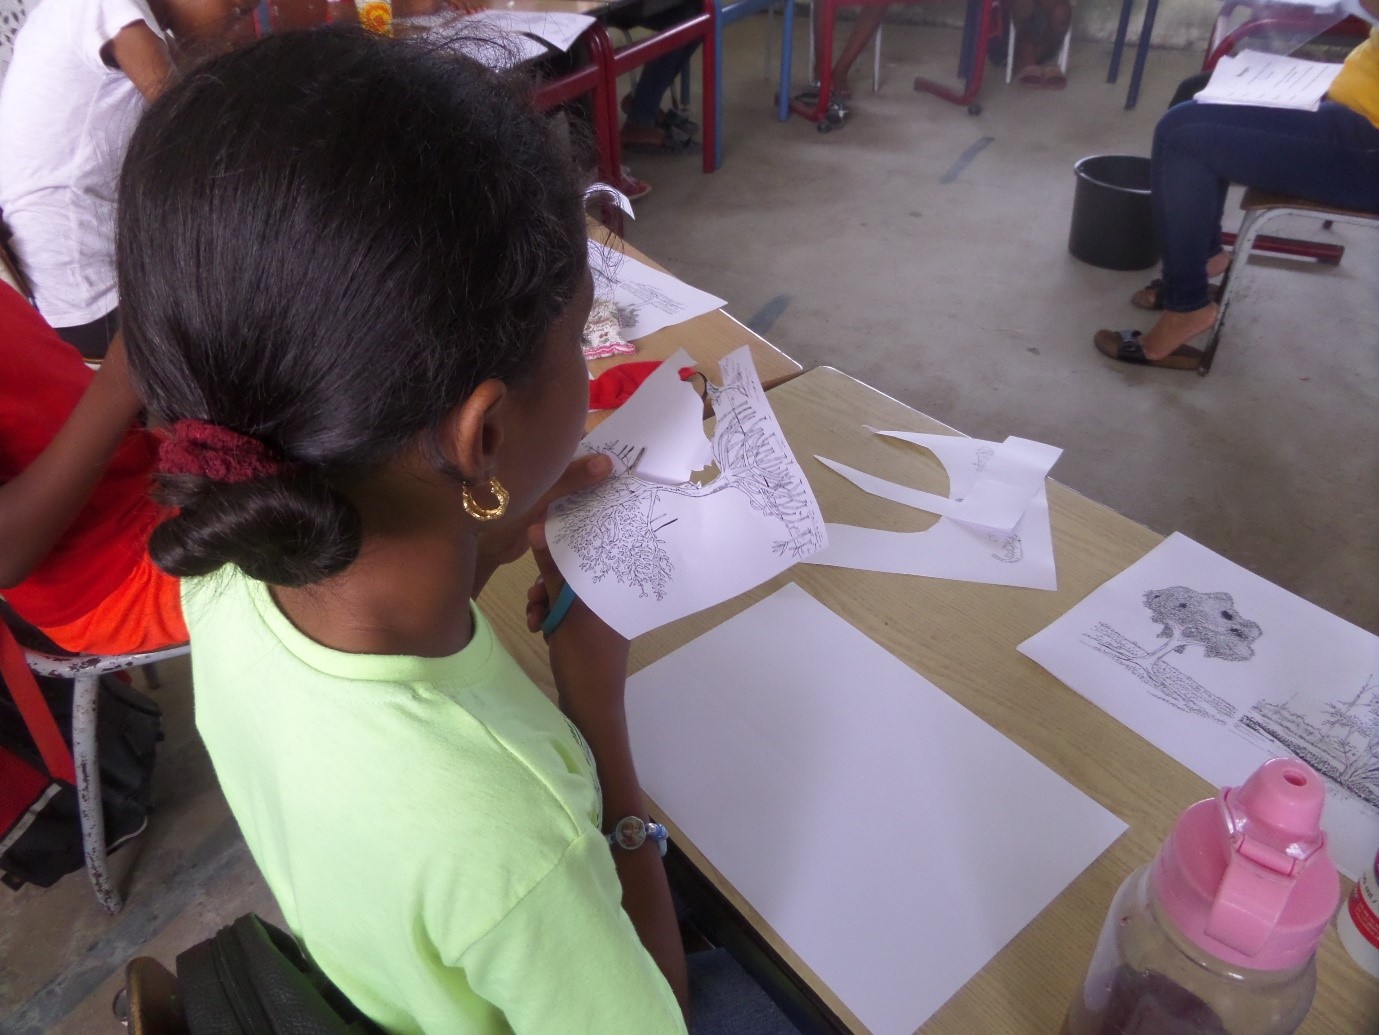 GLOBE Suriname student engaged in a summer vacation activity in the classroom